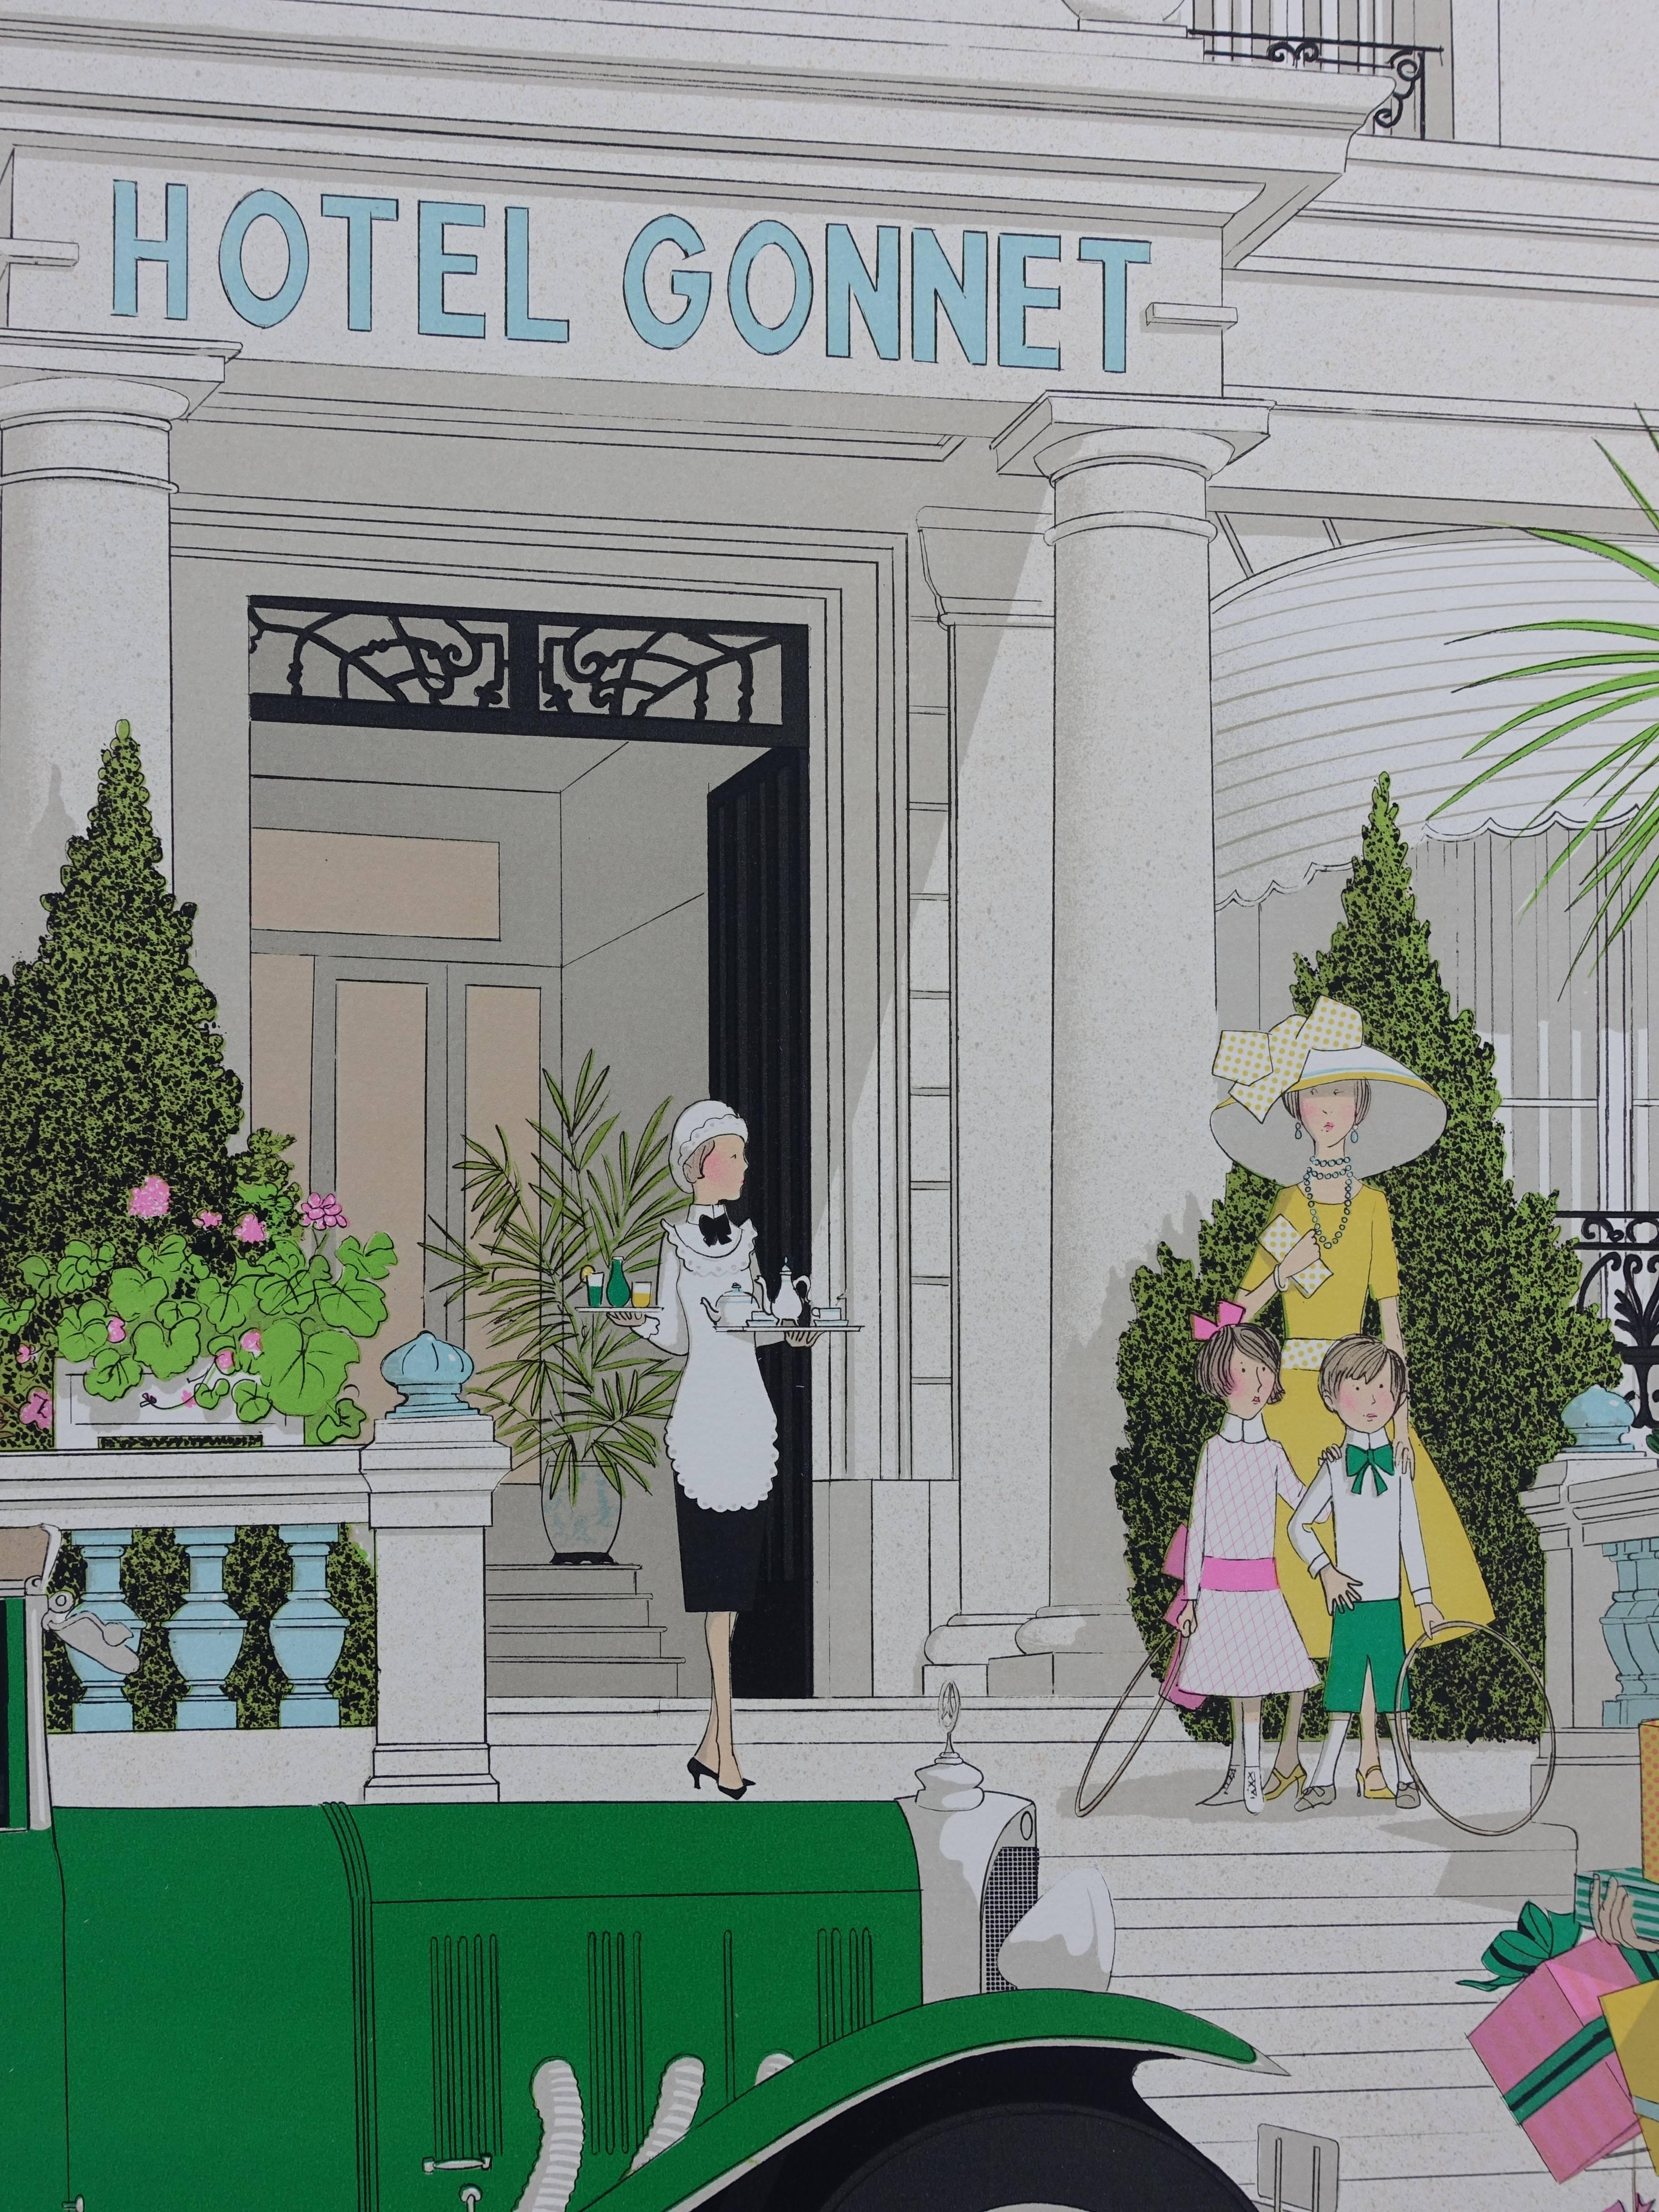 Mercedes 370 and Hotel Gonnet - Signed lithograph - 115ex 1